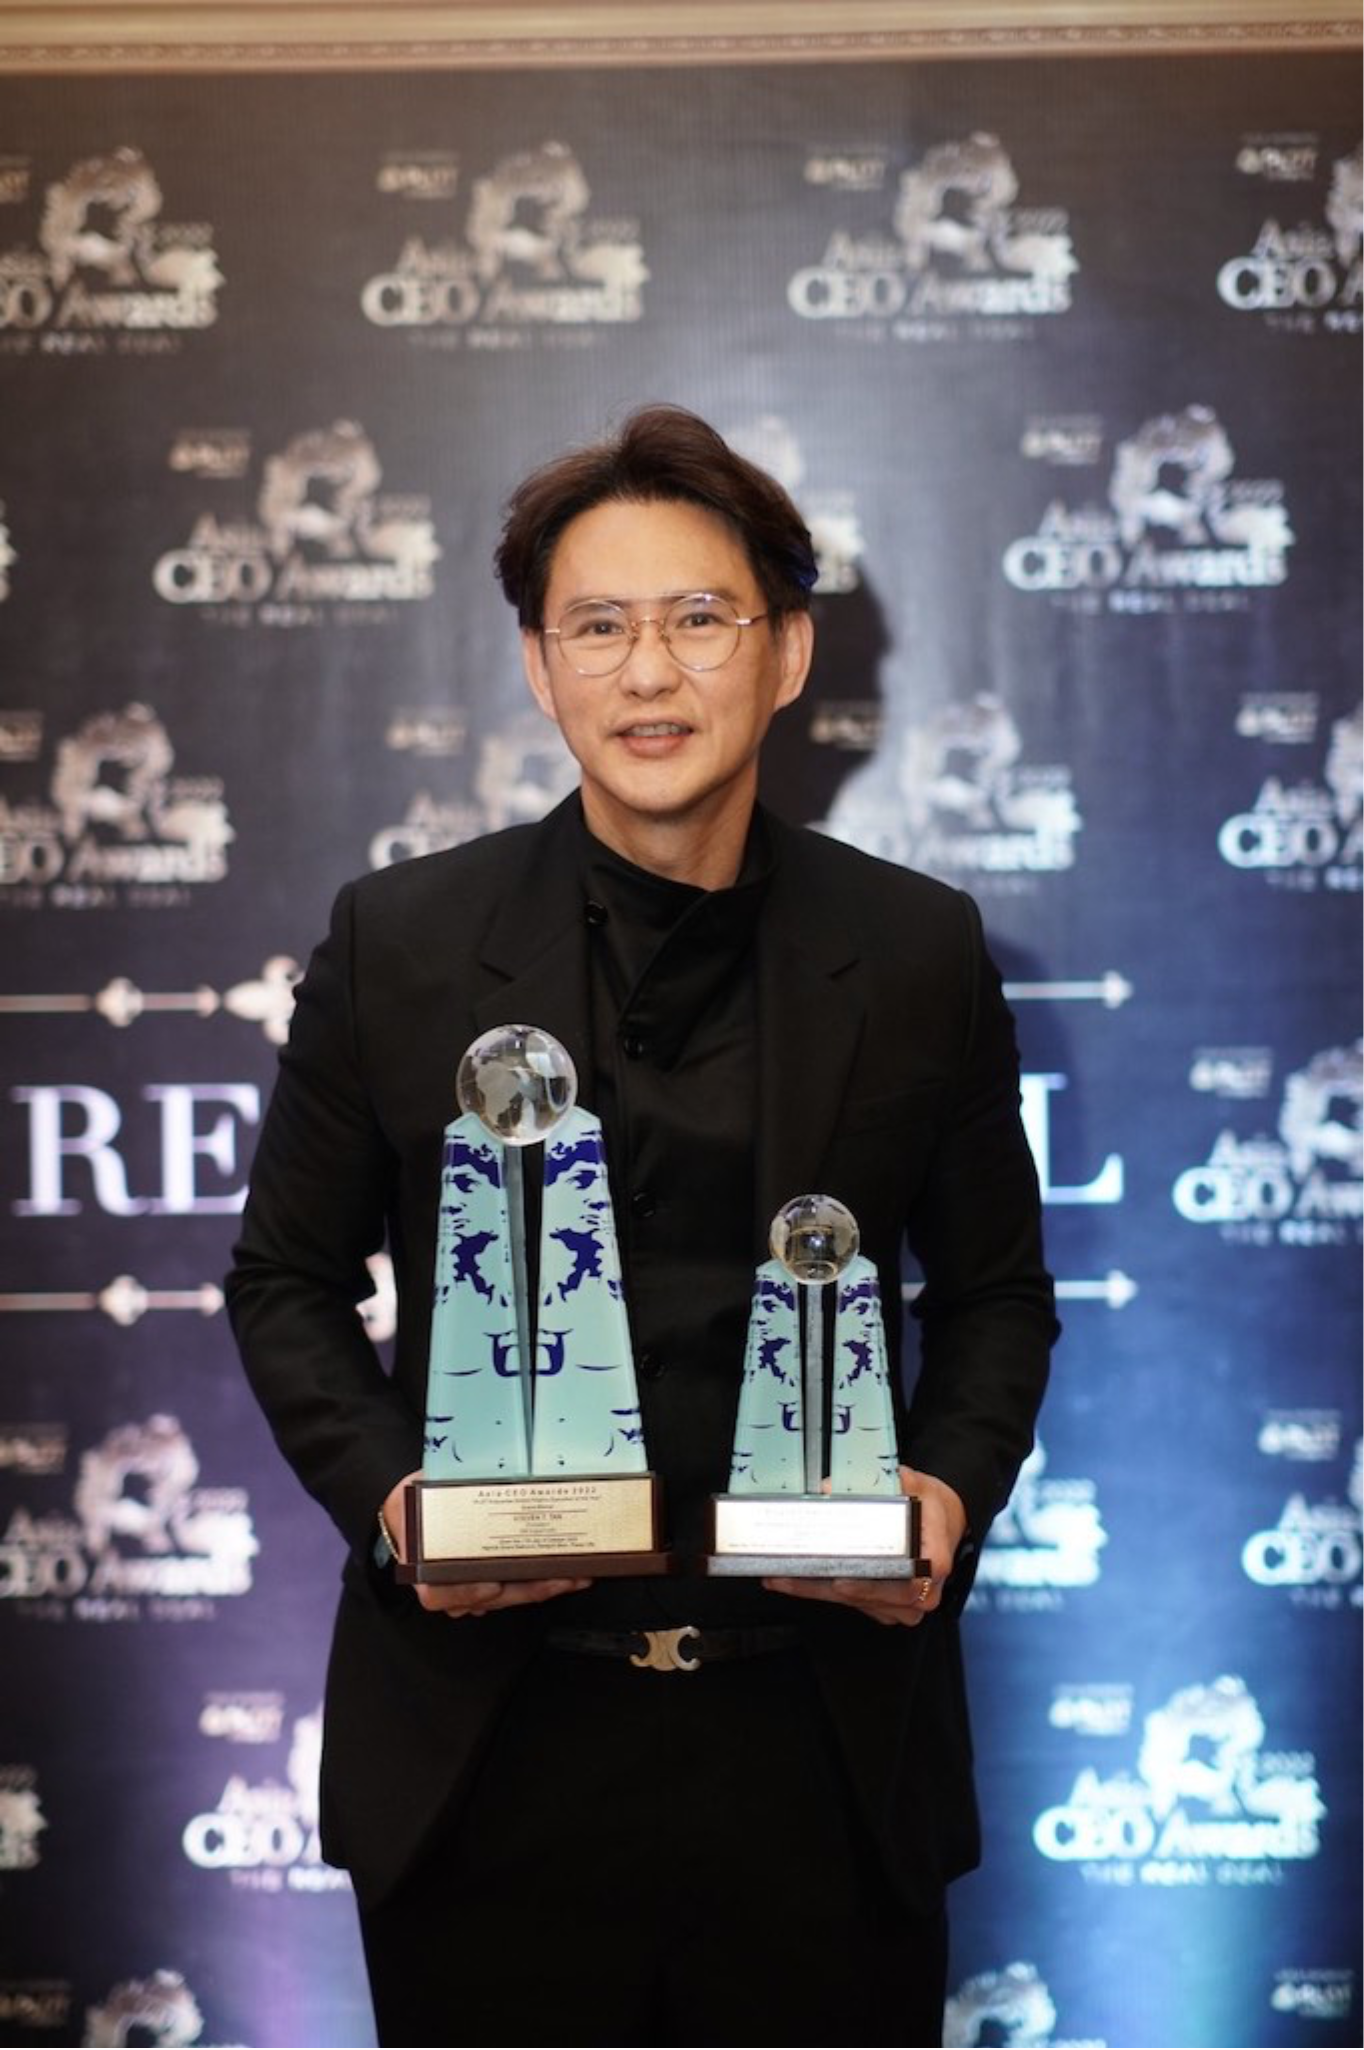 SM Supermalls President wins as Global Filipino Executive of the Year